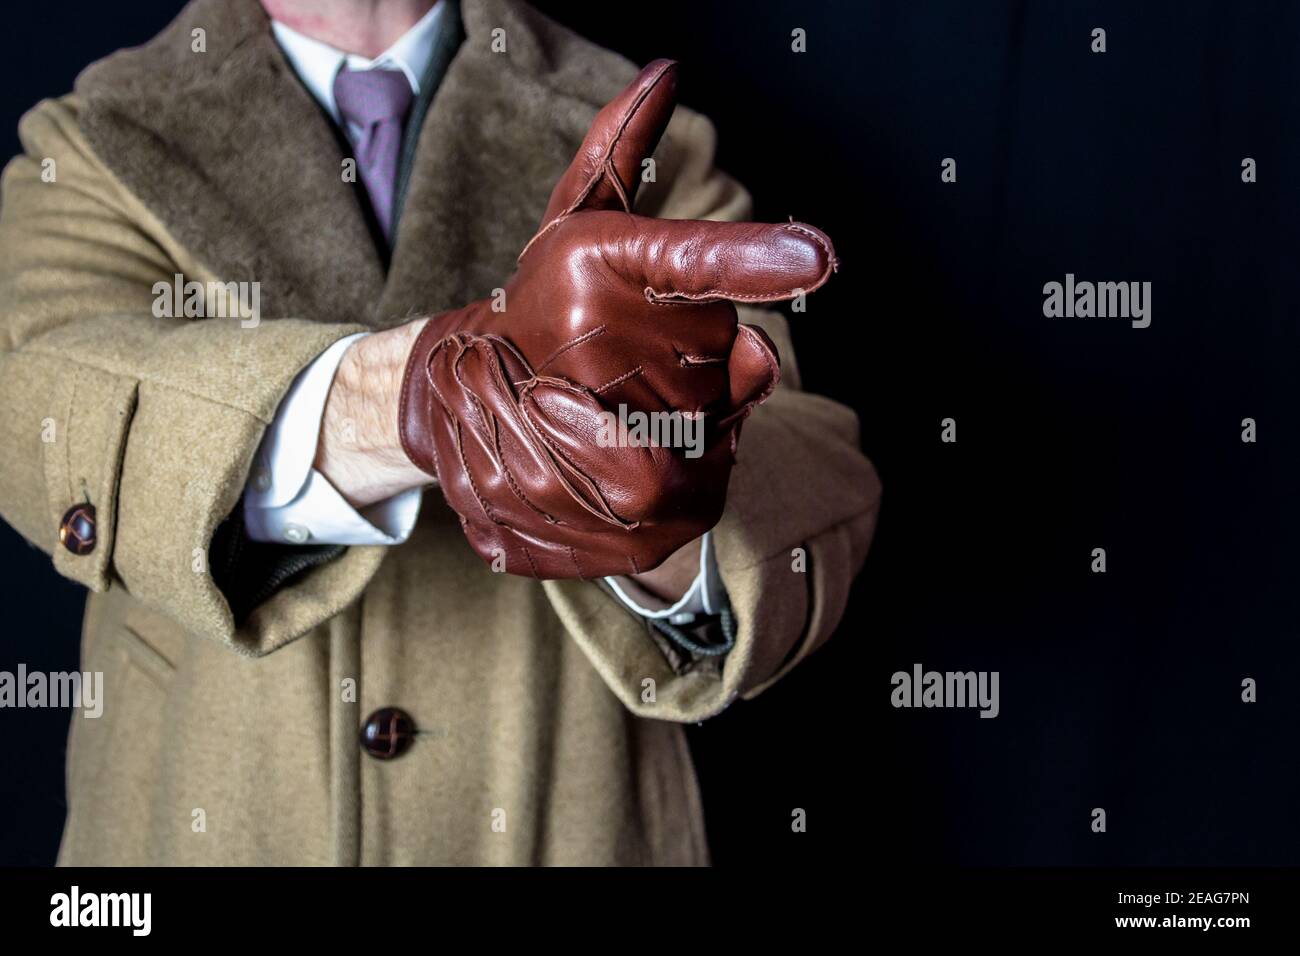 Portrait of Man in Coat and Suit Pointing Finger Gun Gesture on Black Background. Film Noir Secret Agent Spy. Playing Detective Action Hero Stock Photo